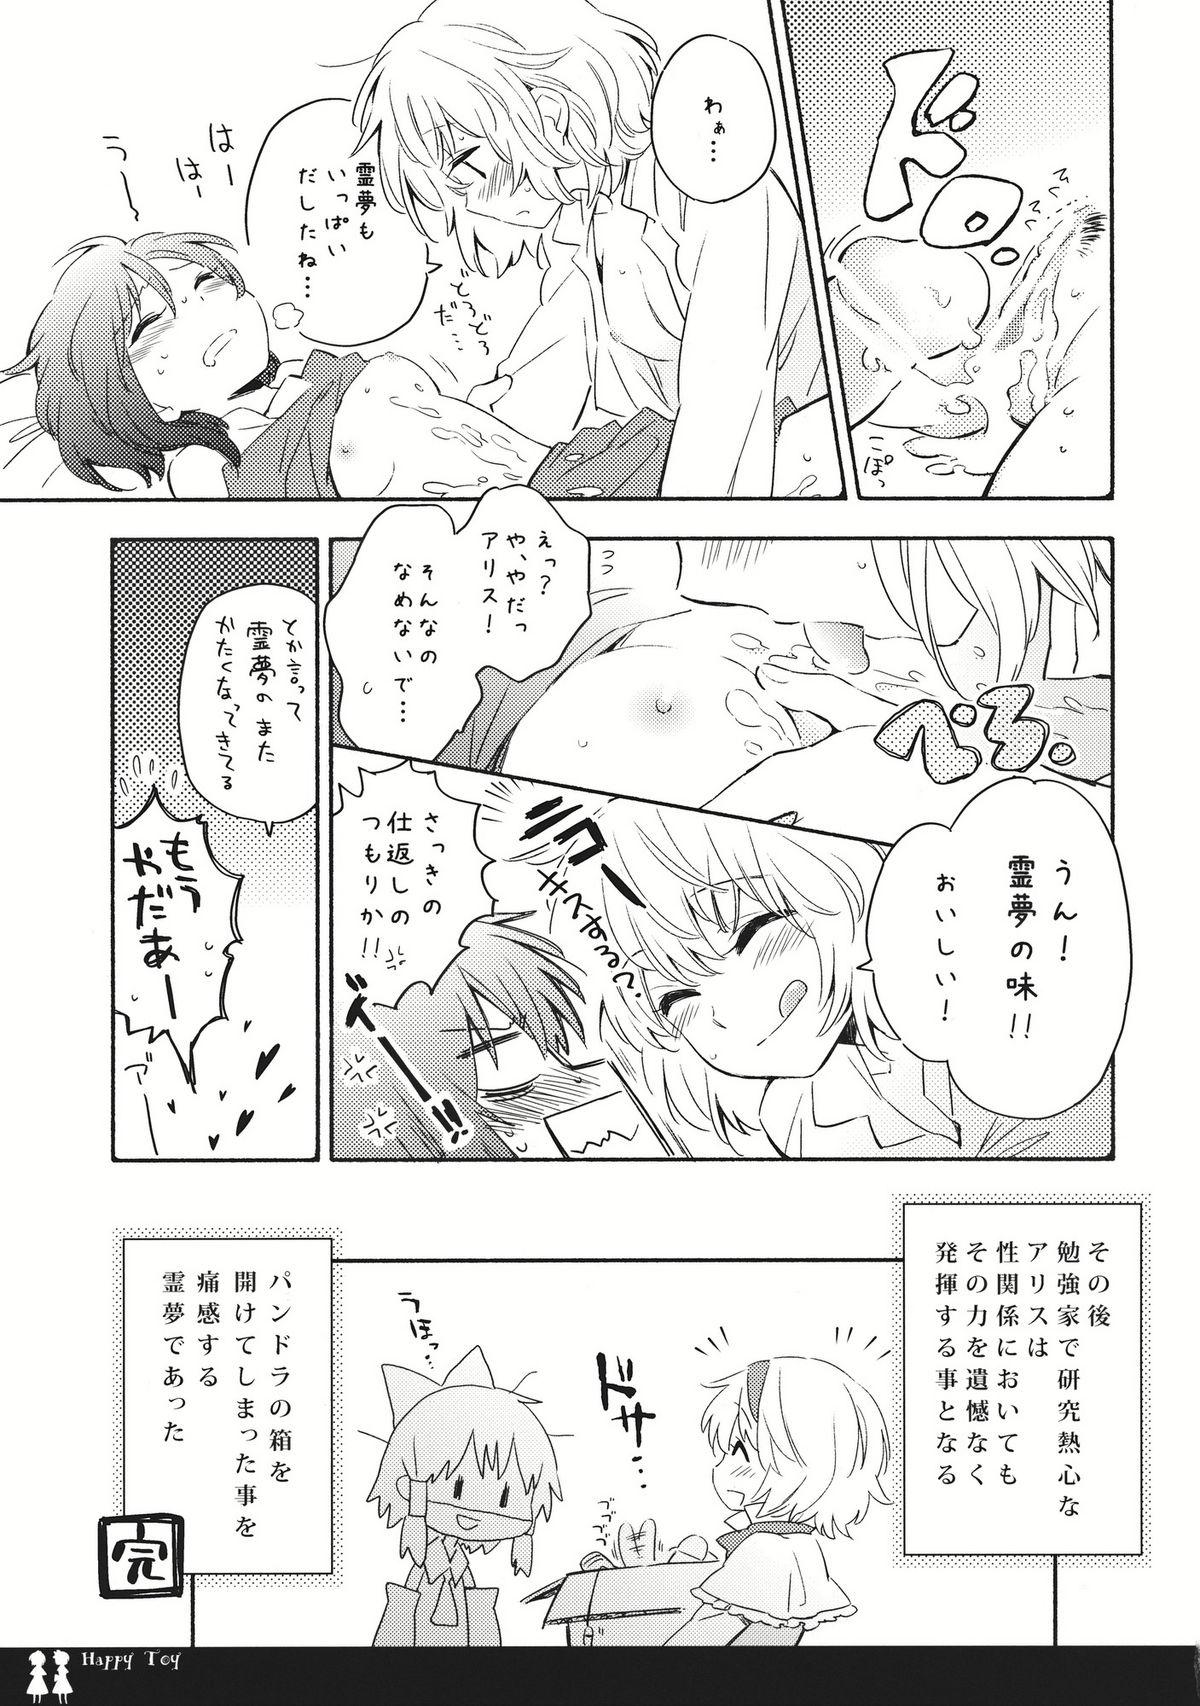 Village Happy Toy - Touhou project Ex Girlfriends - Page 13